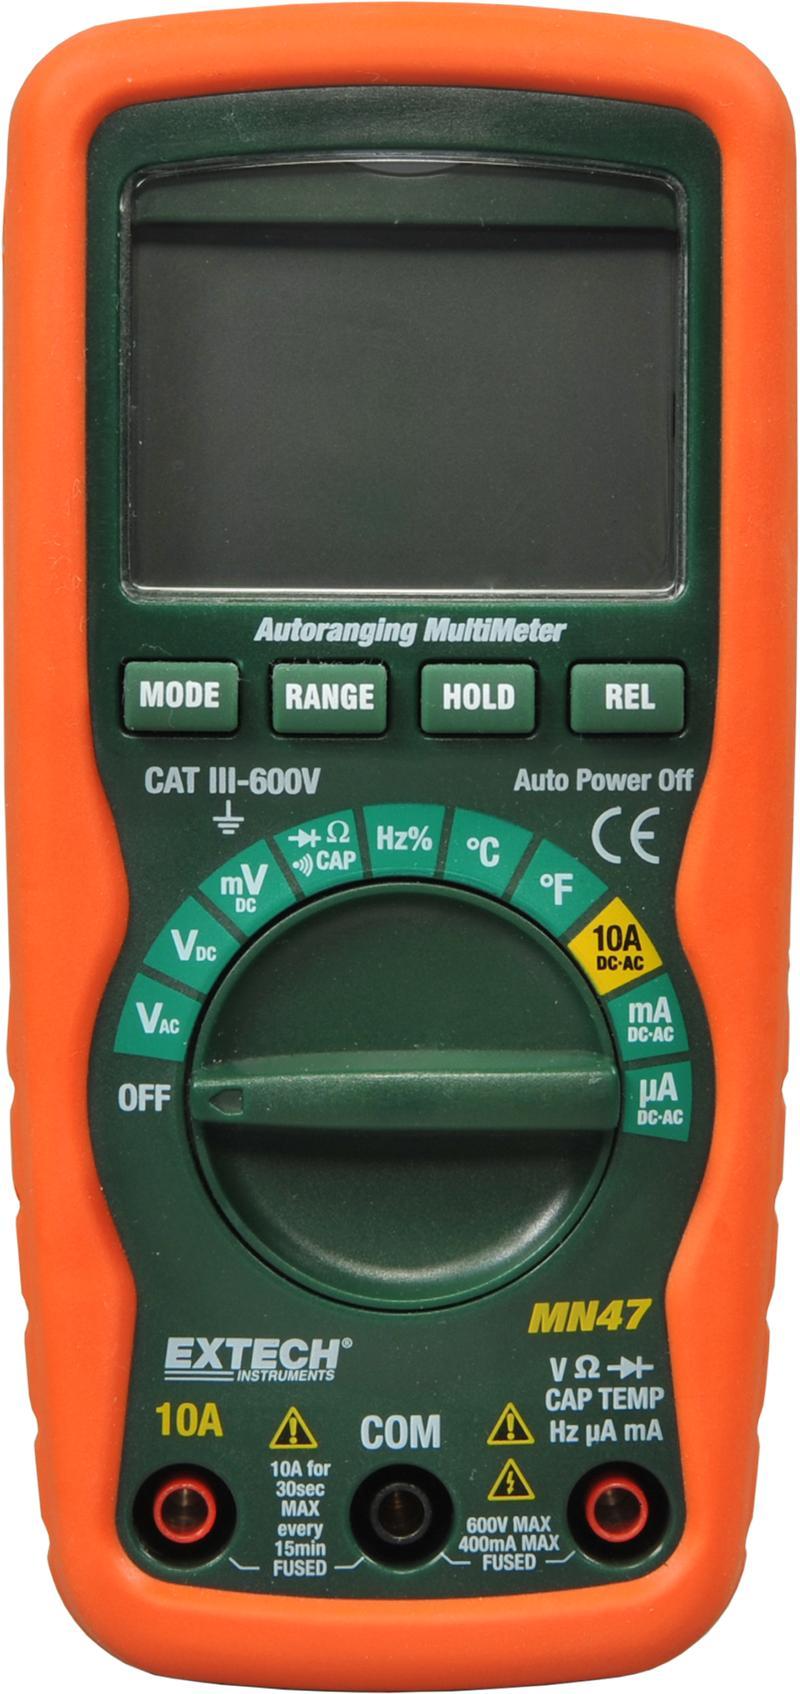 Multimeter 46290-00 The multimeter is used to perform voltage, current, and resistance measurements. It is used for troubleshooting exercises requiring basic electrical measurements.